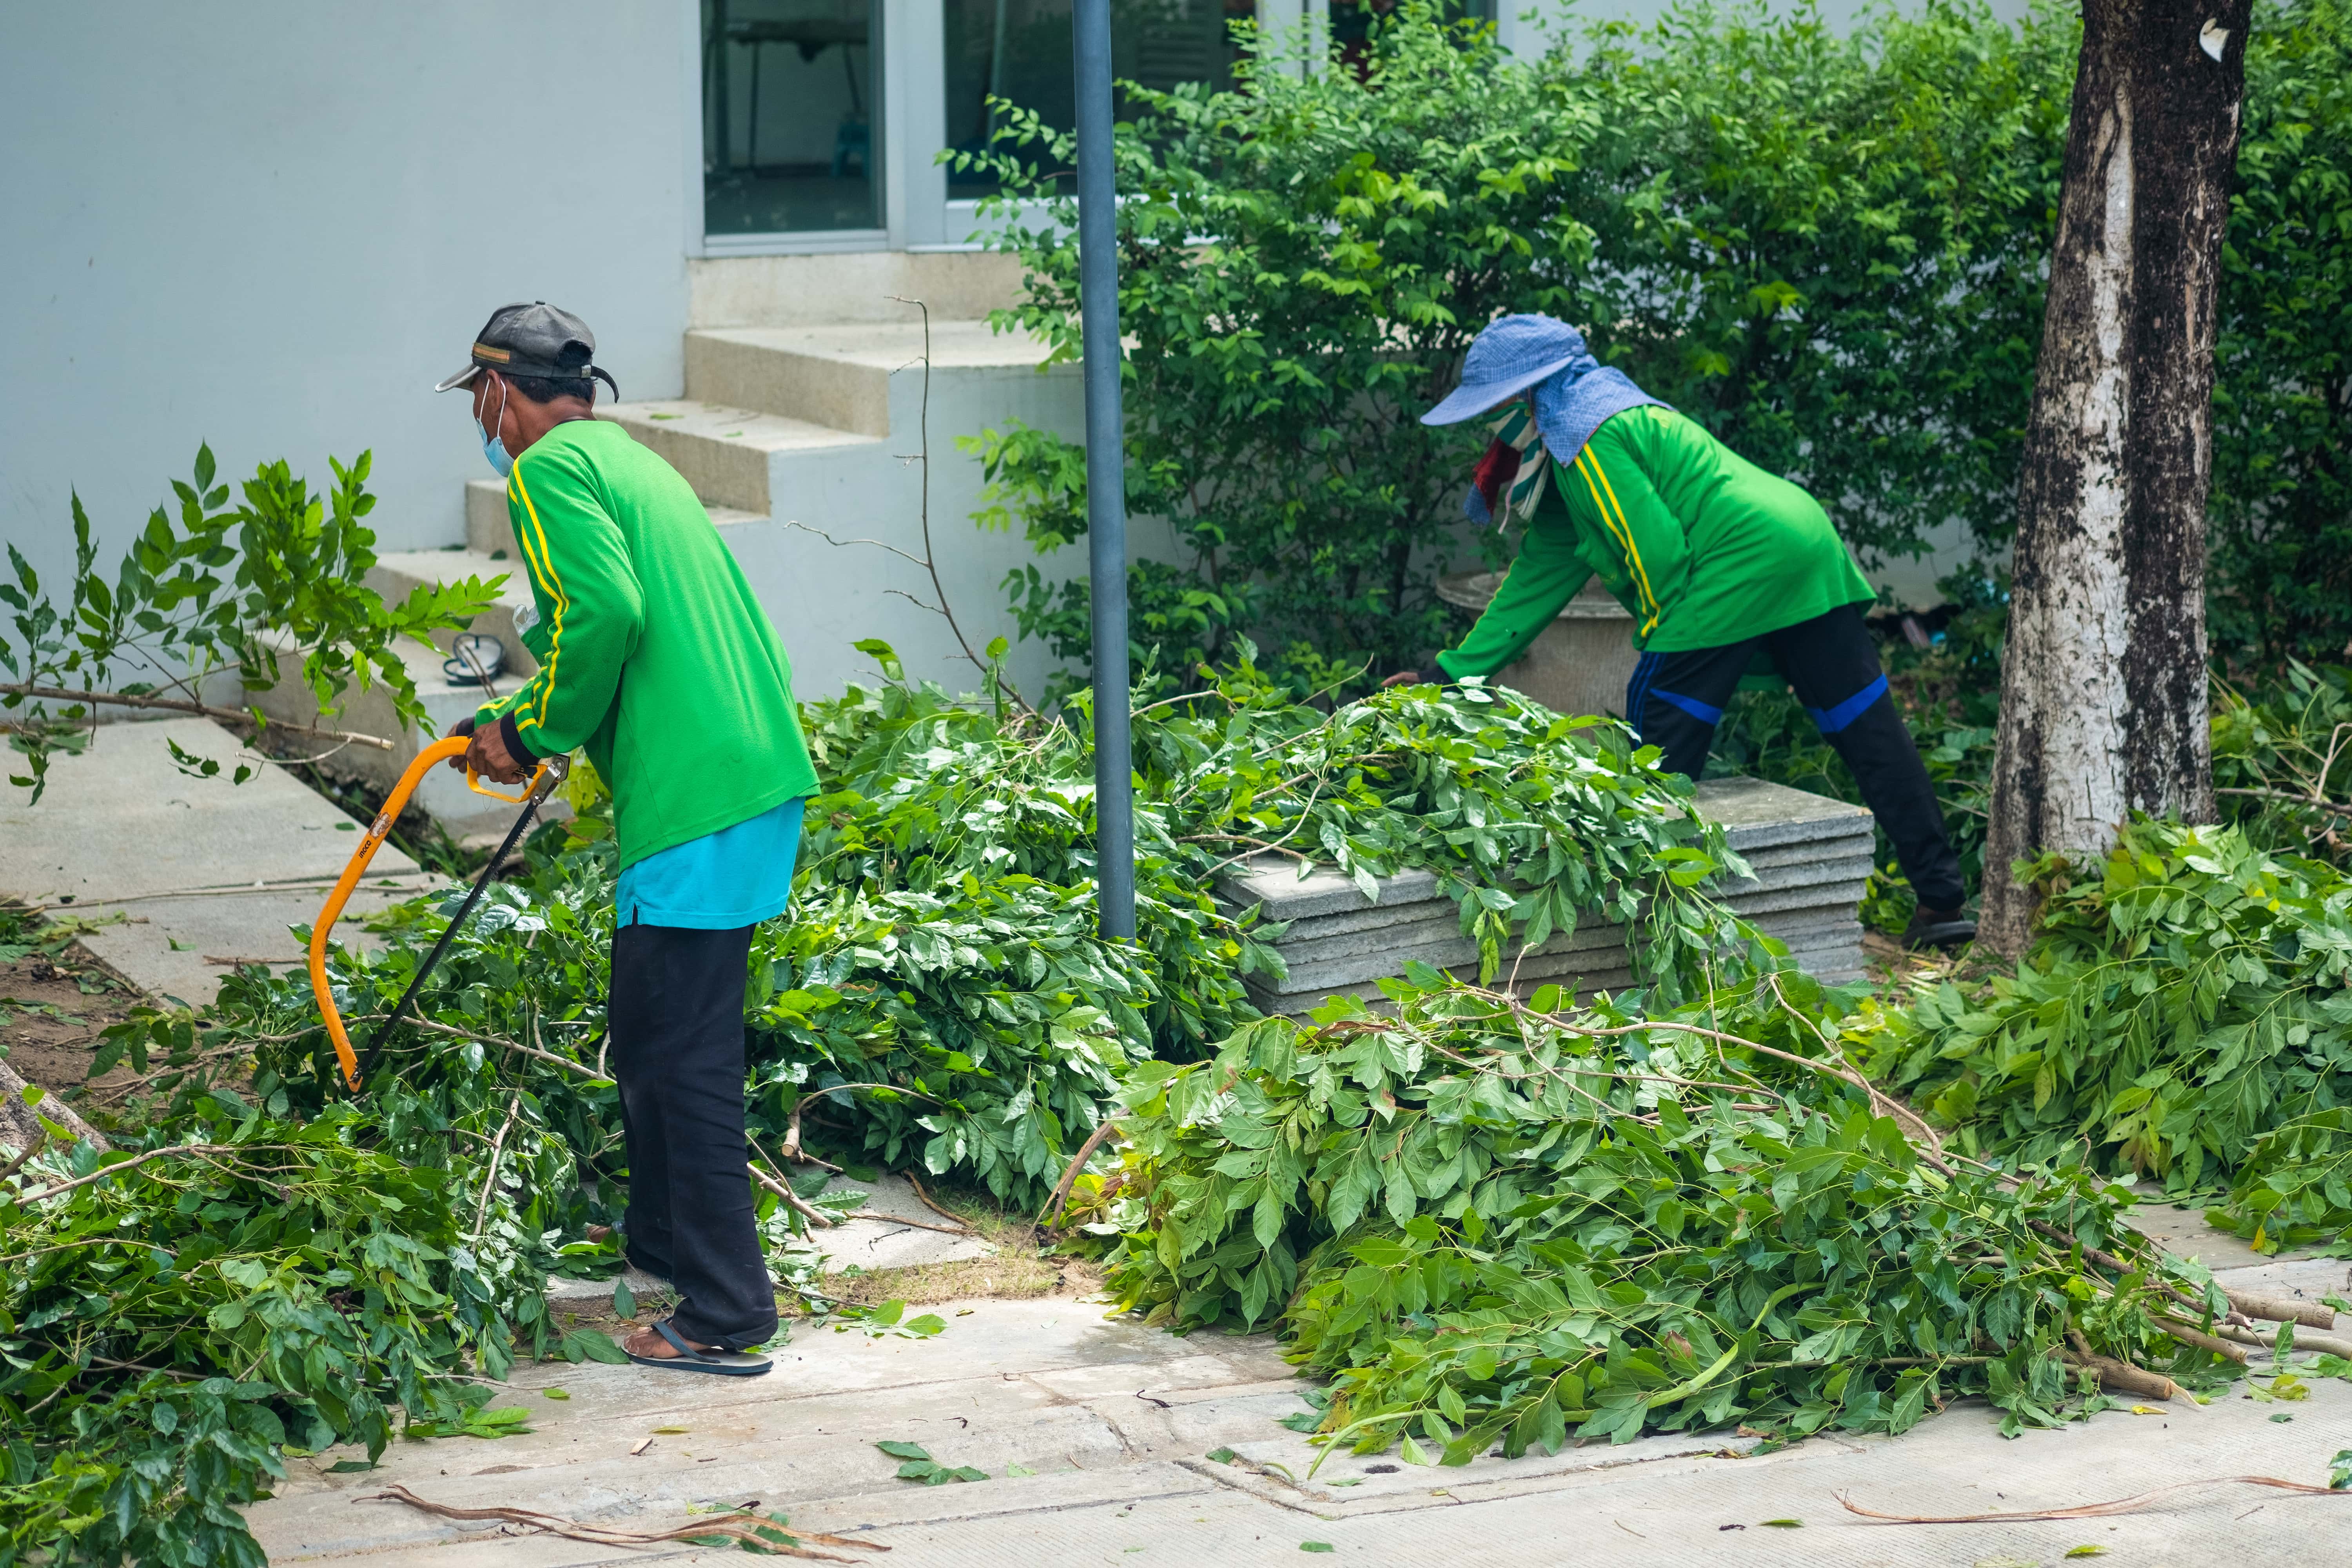 an image of men cleaning up cut down branches